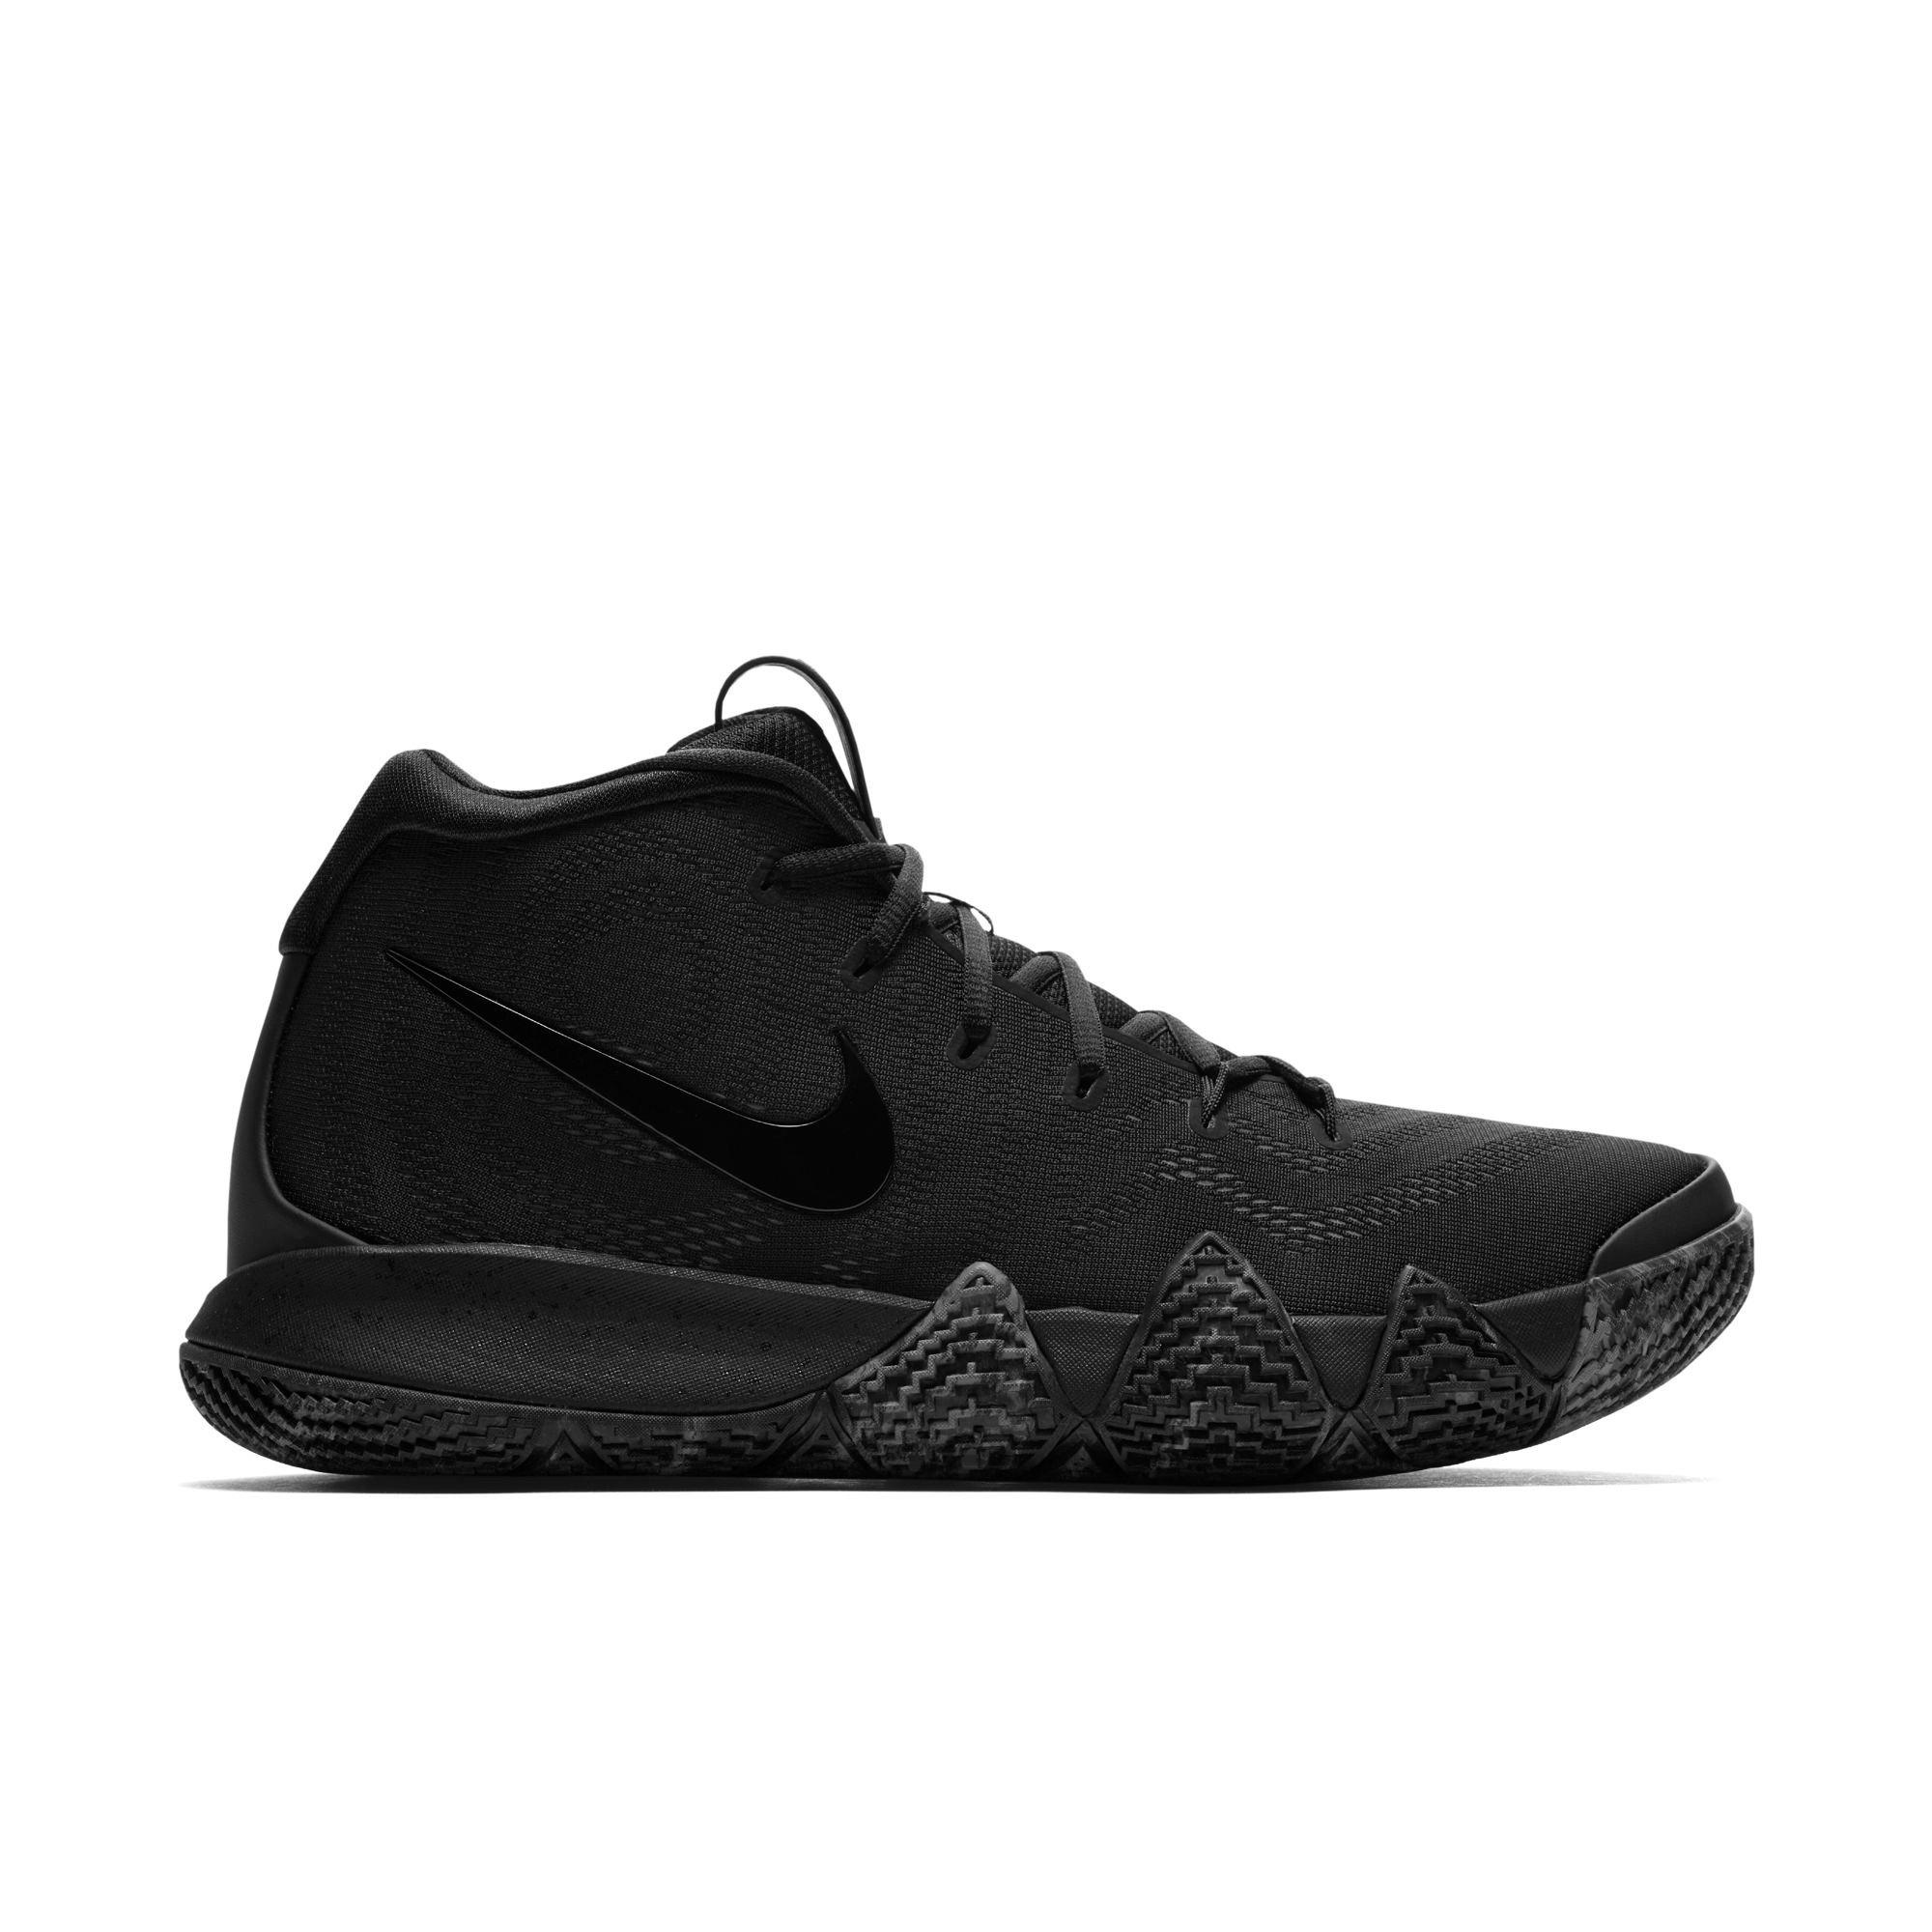 kyrie irving 4 shoes black